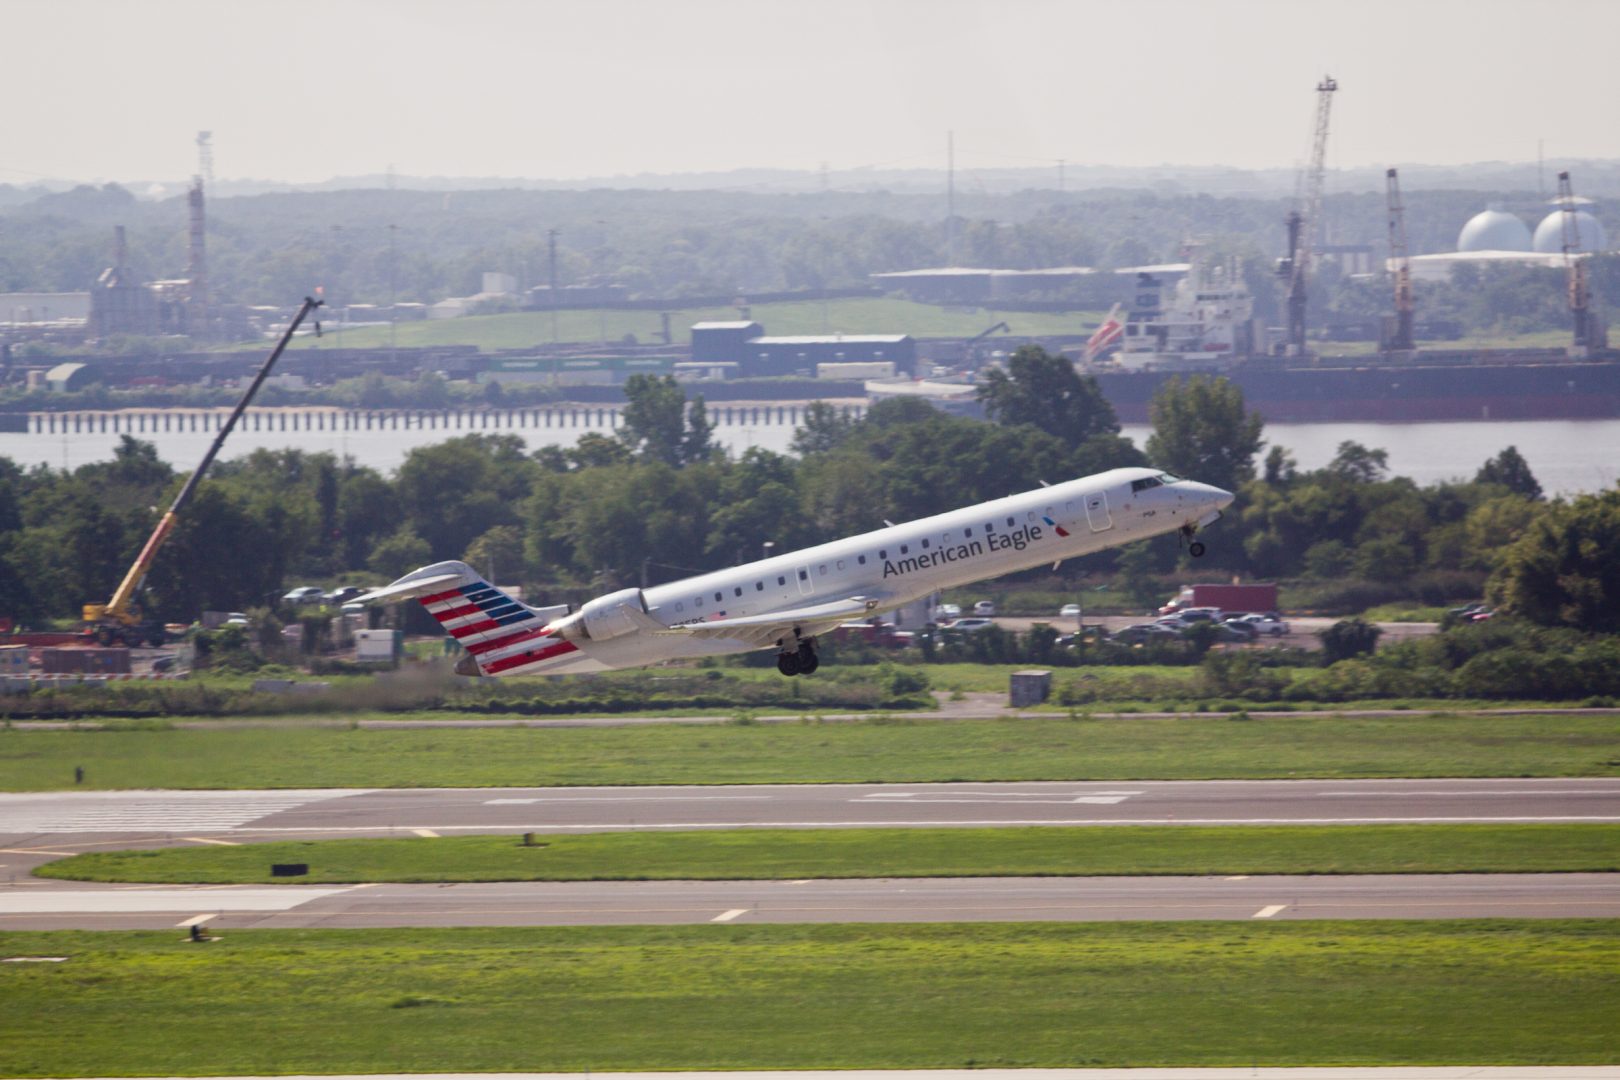 A plane takes off from Philadelphia International Airport, located near the Delaware River.